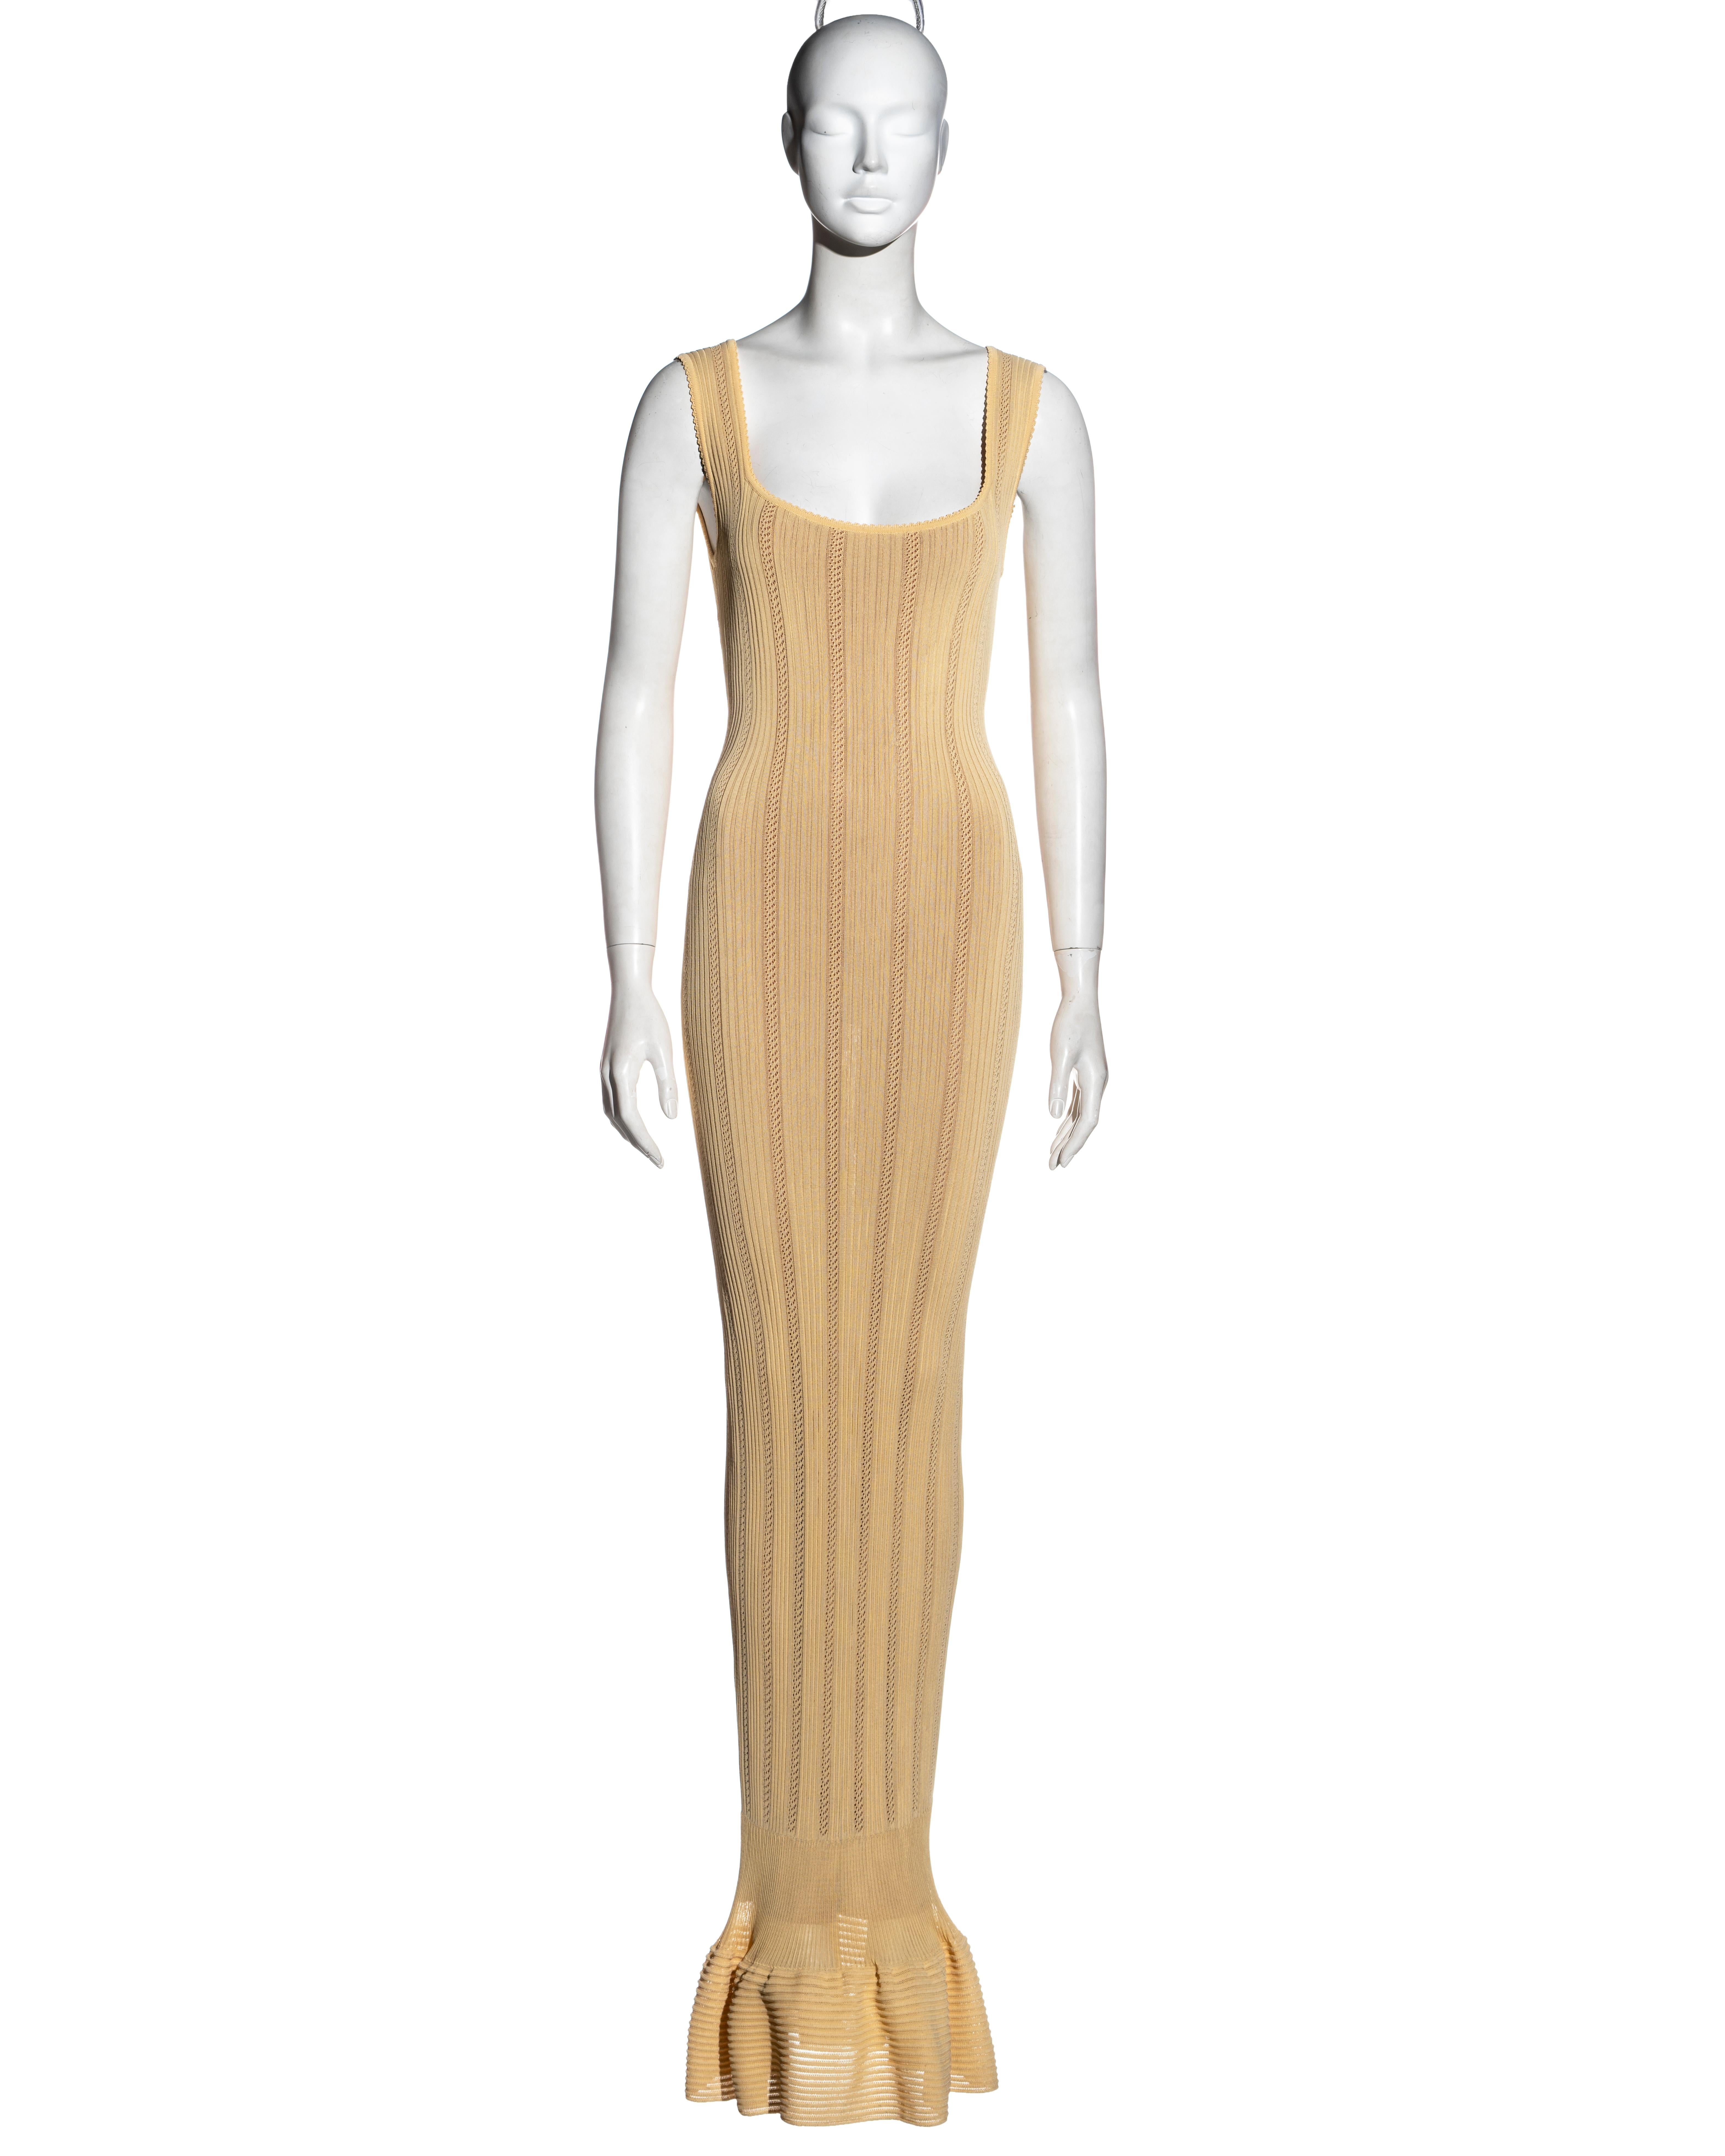 ▪ Azzedine Alaia yellow rayon floor-length dress
▪ Stretch open-knit 
▪ Fishtail skirt 
▪ Figure hugging fit 
▪ Nude lining 
▪ Size 'S'
▪ Spring-Summer 1996
▪ 100% Rayon
▪ Made in Italy